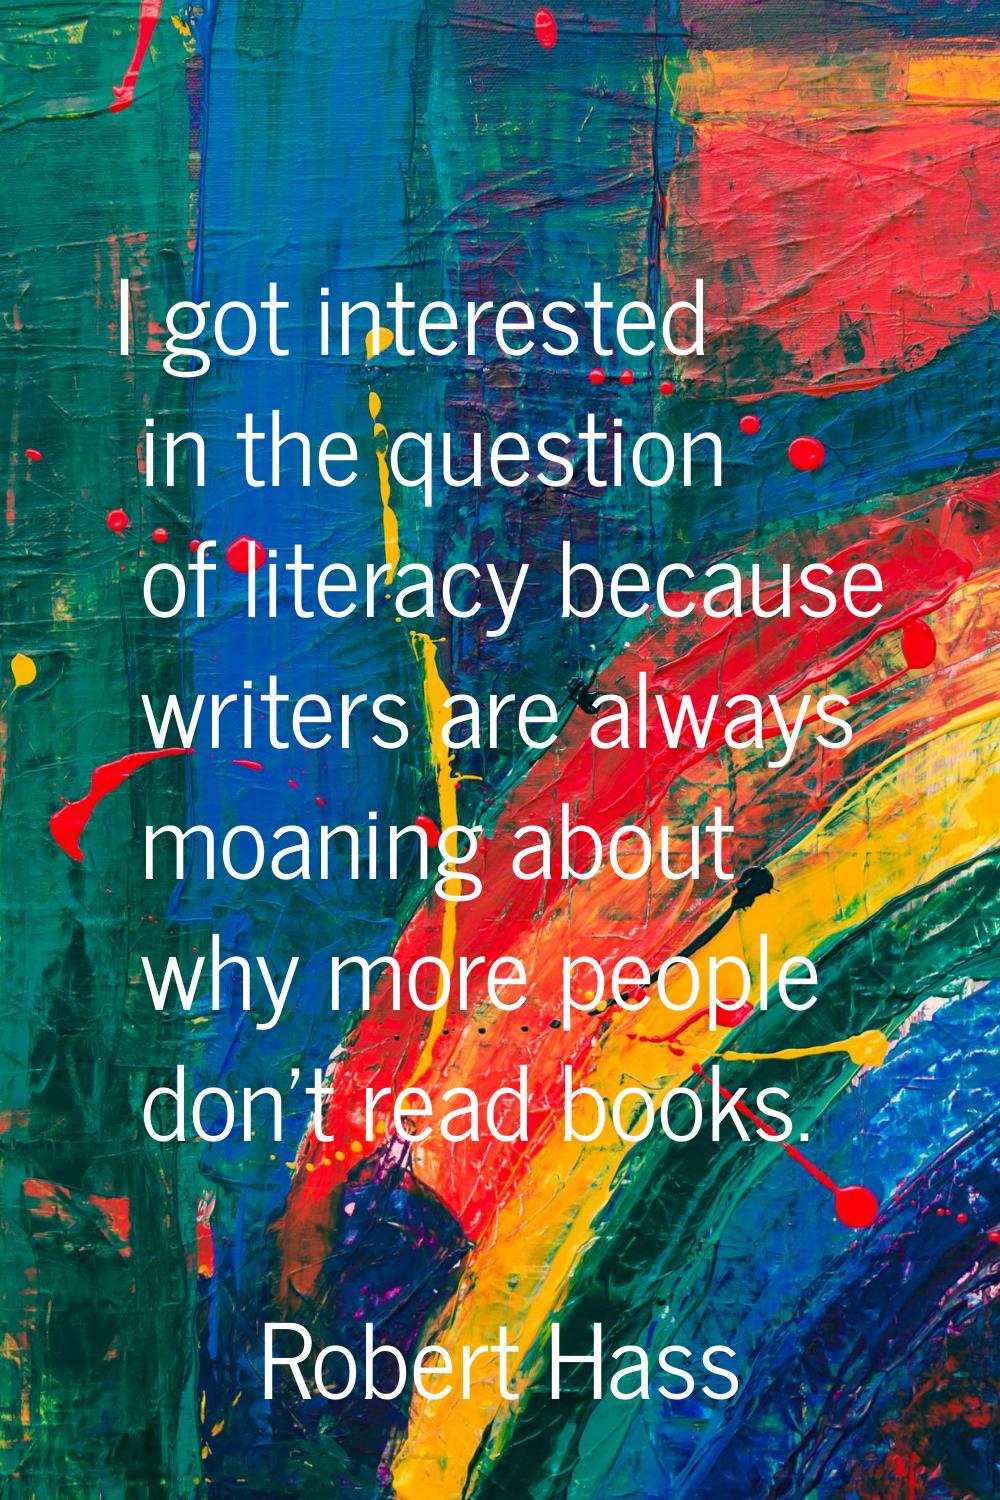 I got interested in the question of literacy because writers are always moaning about why more peop